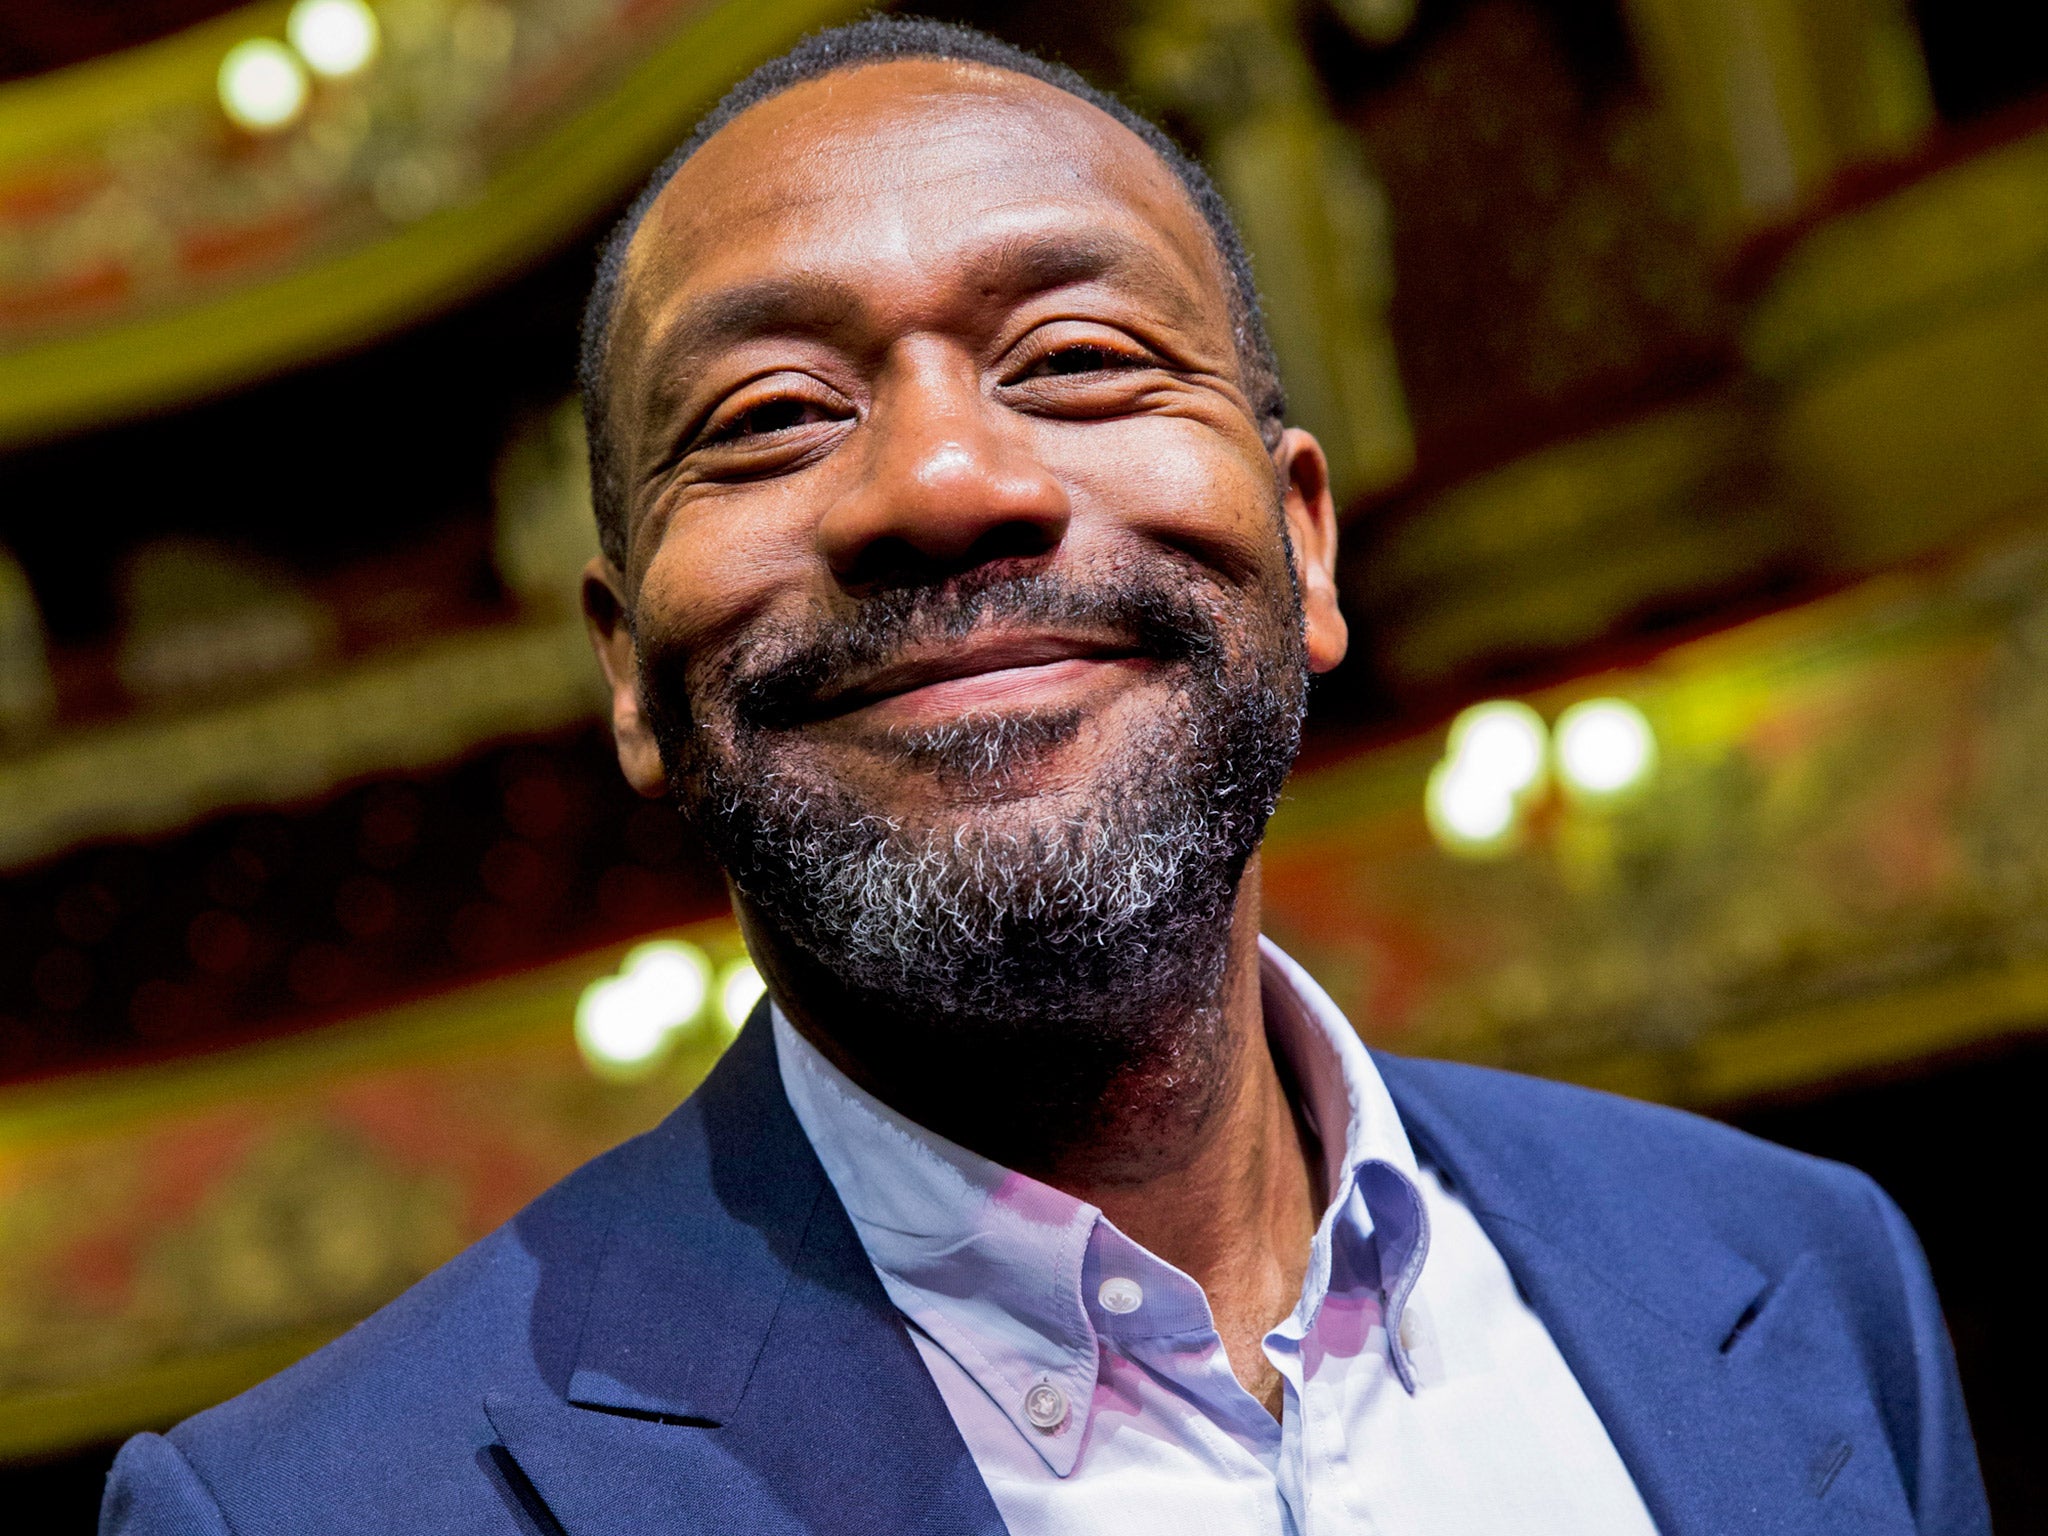 Sir Lenny: 'We need to hear more Midlands voices'